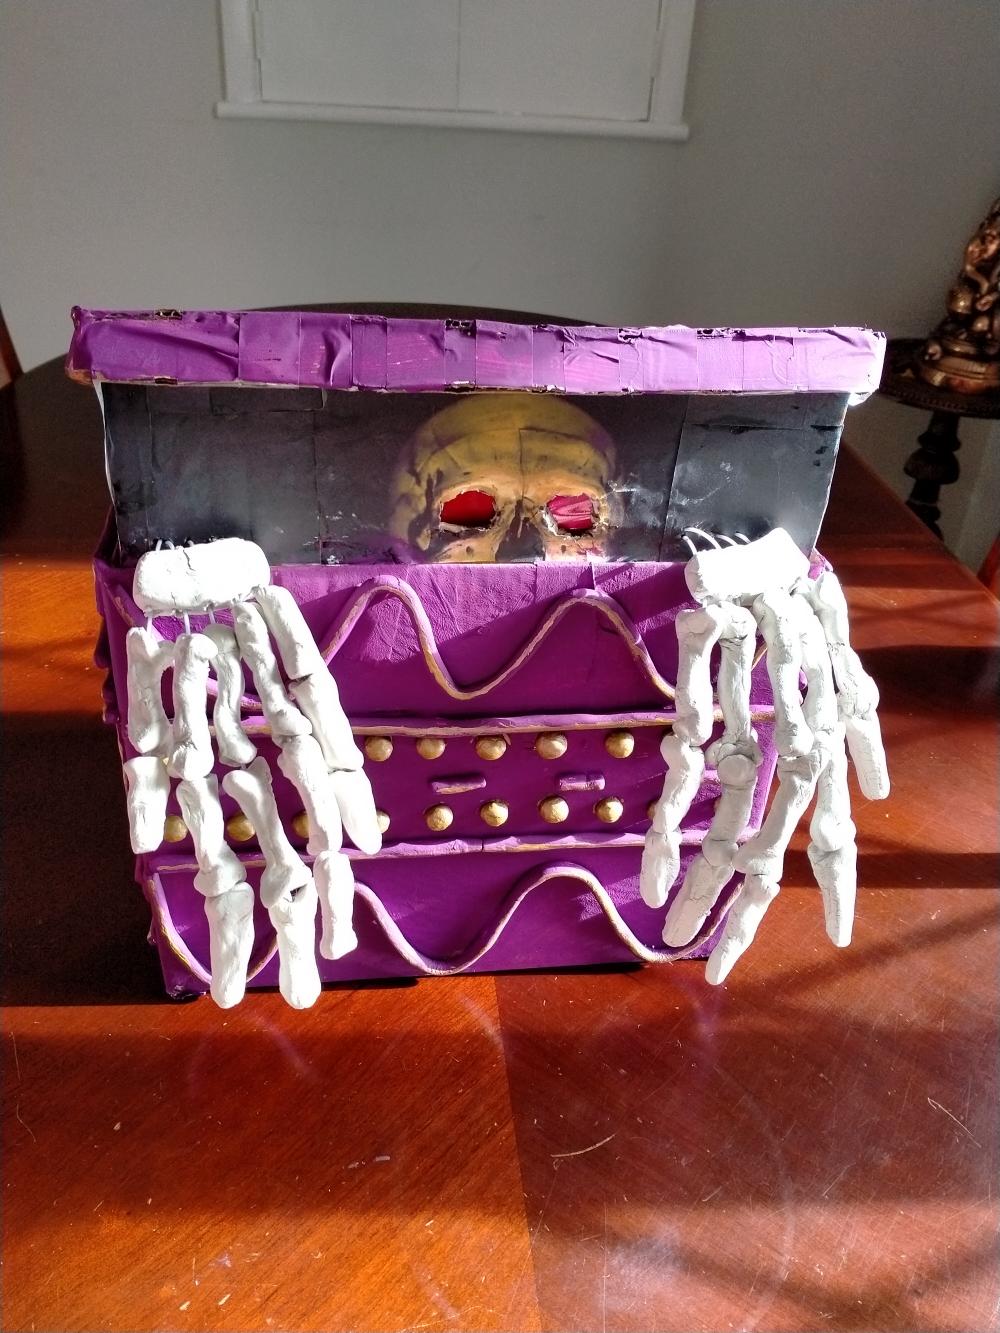 Model of Pandora's Box: skeleton emerges from beneath the half-open lid of a purple box.